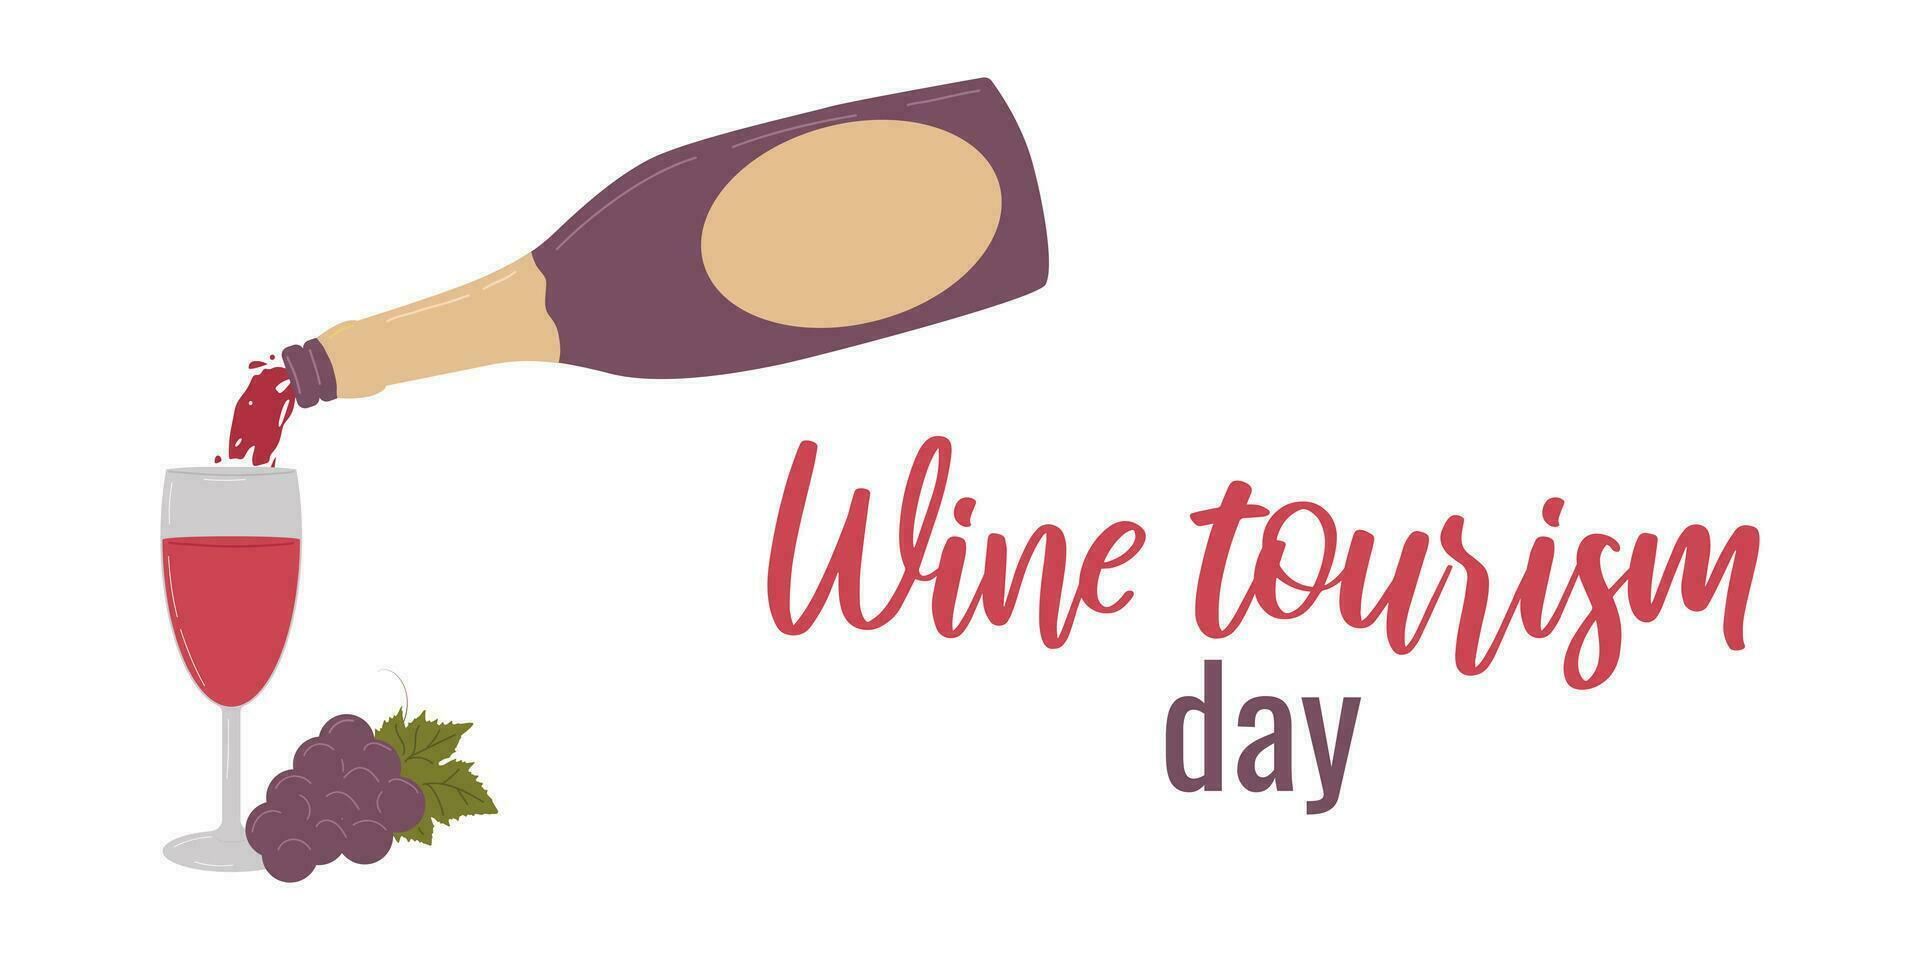 Wine tourism day. Concept of the holiday. vector